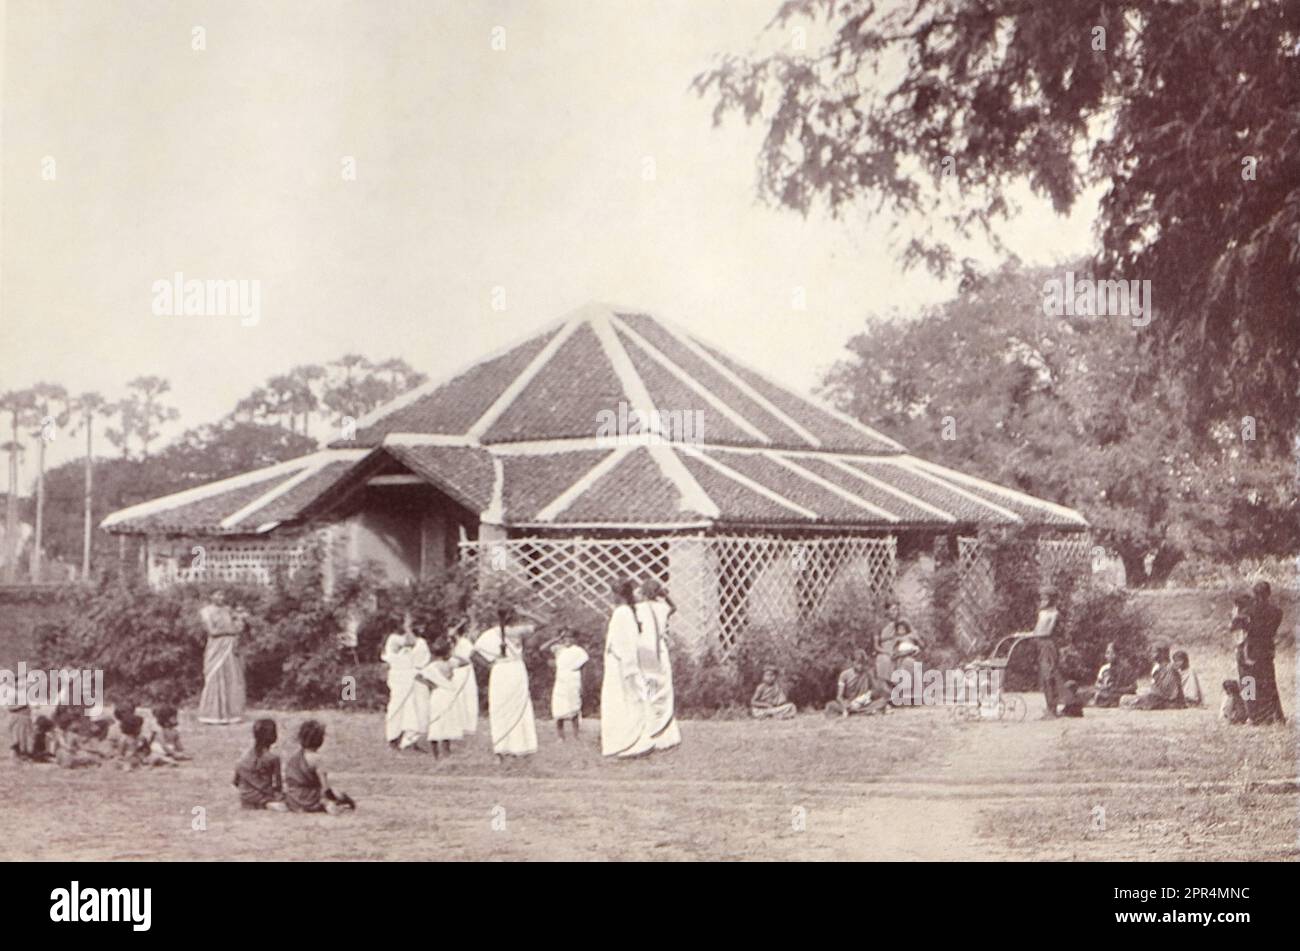 The Cottage Nursery. In the Dohnavur compound. Half-tone engraving from a photograph by Mr. Penn of Ootacamund (now known as Ooto), in the Tamil Nadu region of Southern India, c1912. The image relates to the Church of England Zenana Mission’s nursery and compound in Dohnavur, also in Tamil Nadu and about thirty miles from the southern tip of India. The compound was run by Amy Wilson-Carmichael and sought to promote Christianity among babies and children (at the time only girls, many who were victims of temple prostitution). Stock Photo